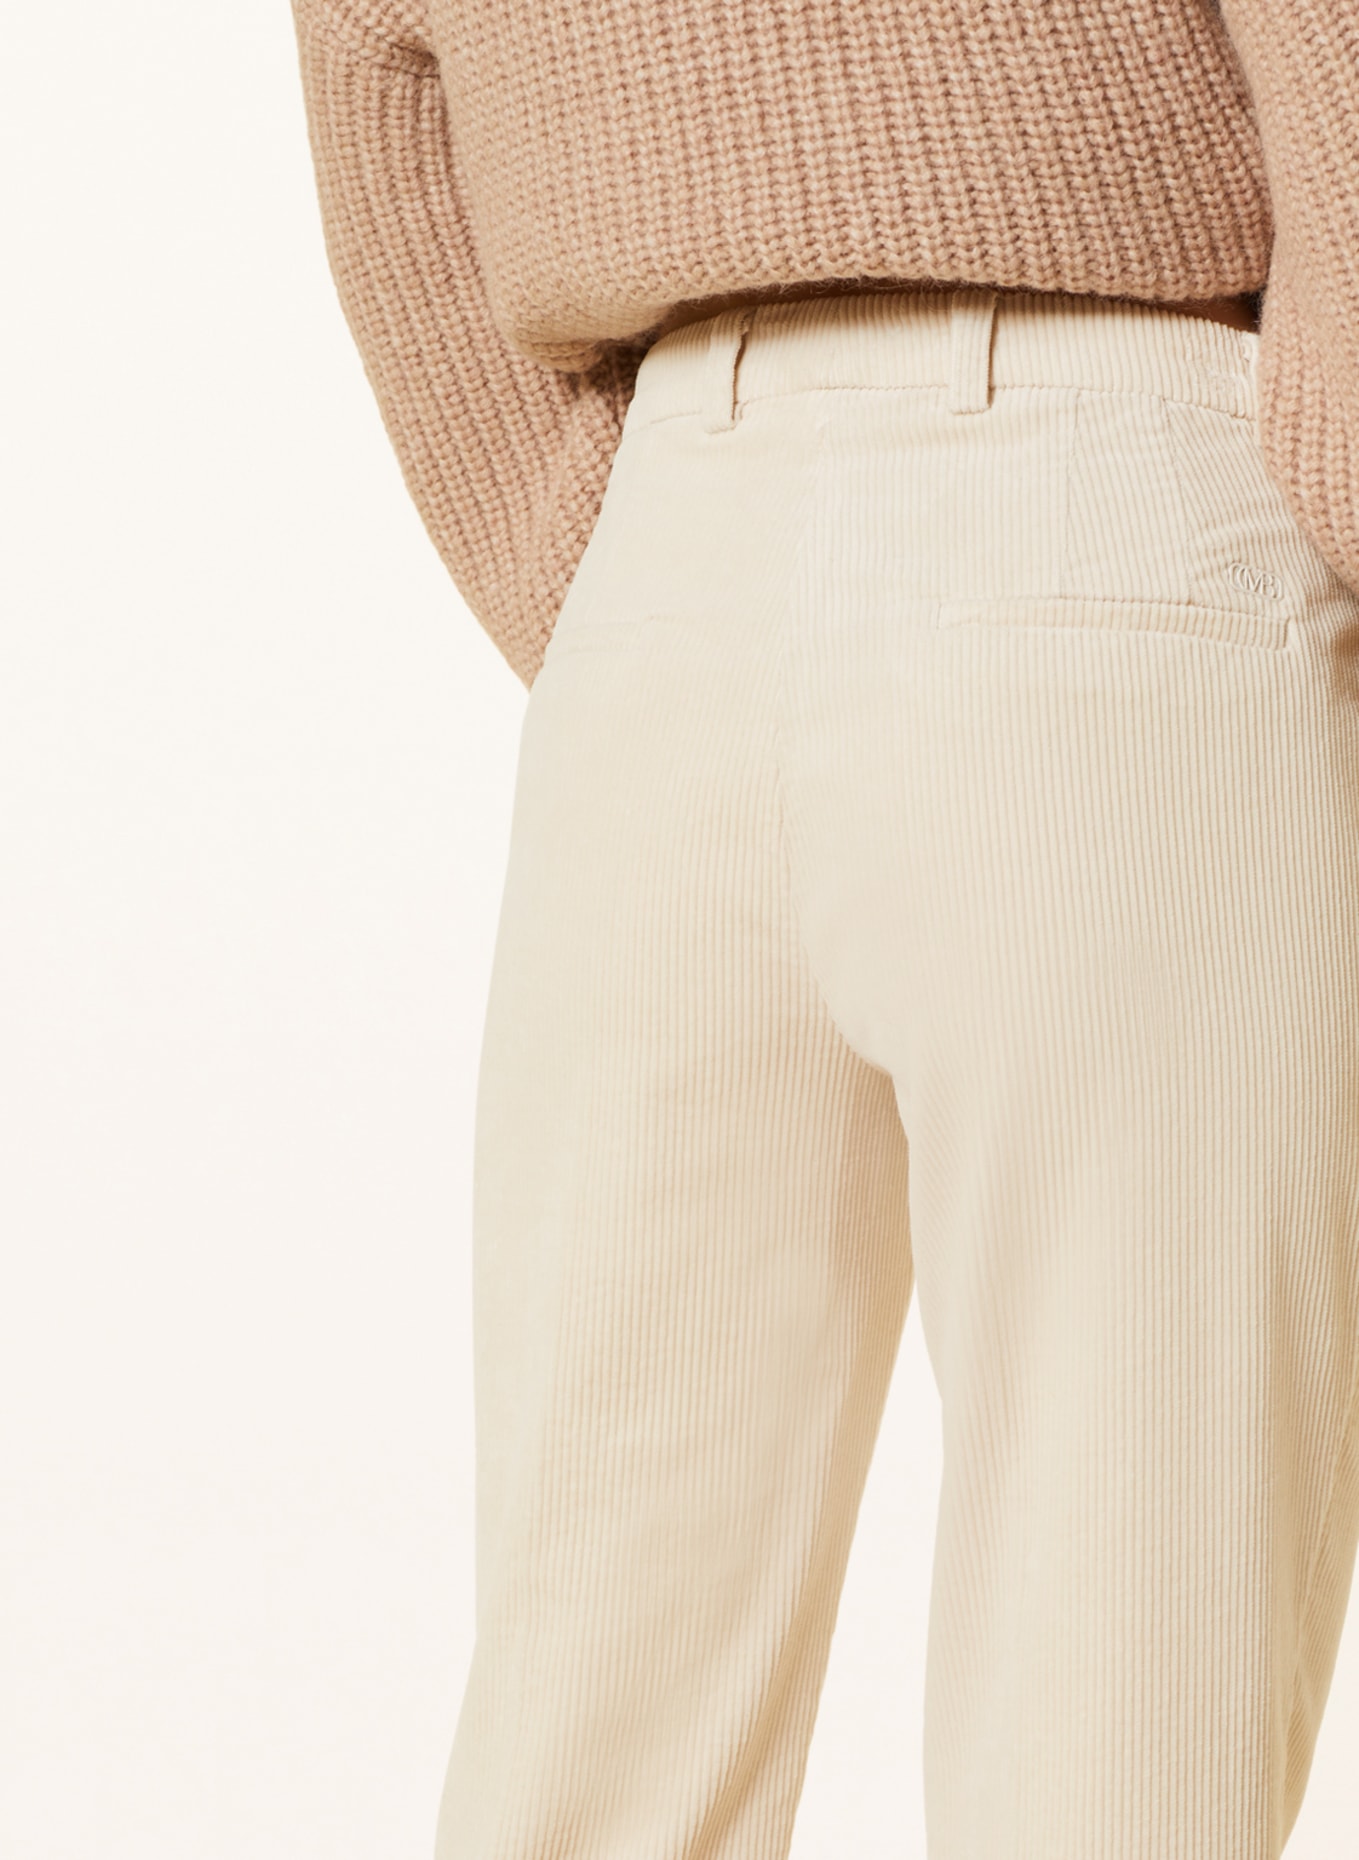 Buy ERL Off-white Corduroy Trousers - 4 Cream At 77% Off | Editorialist